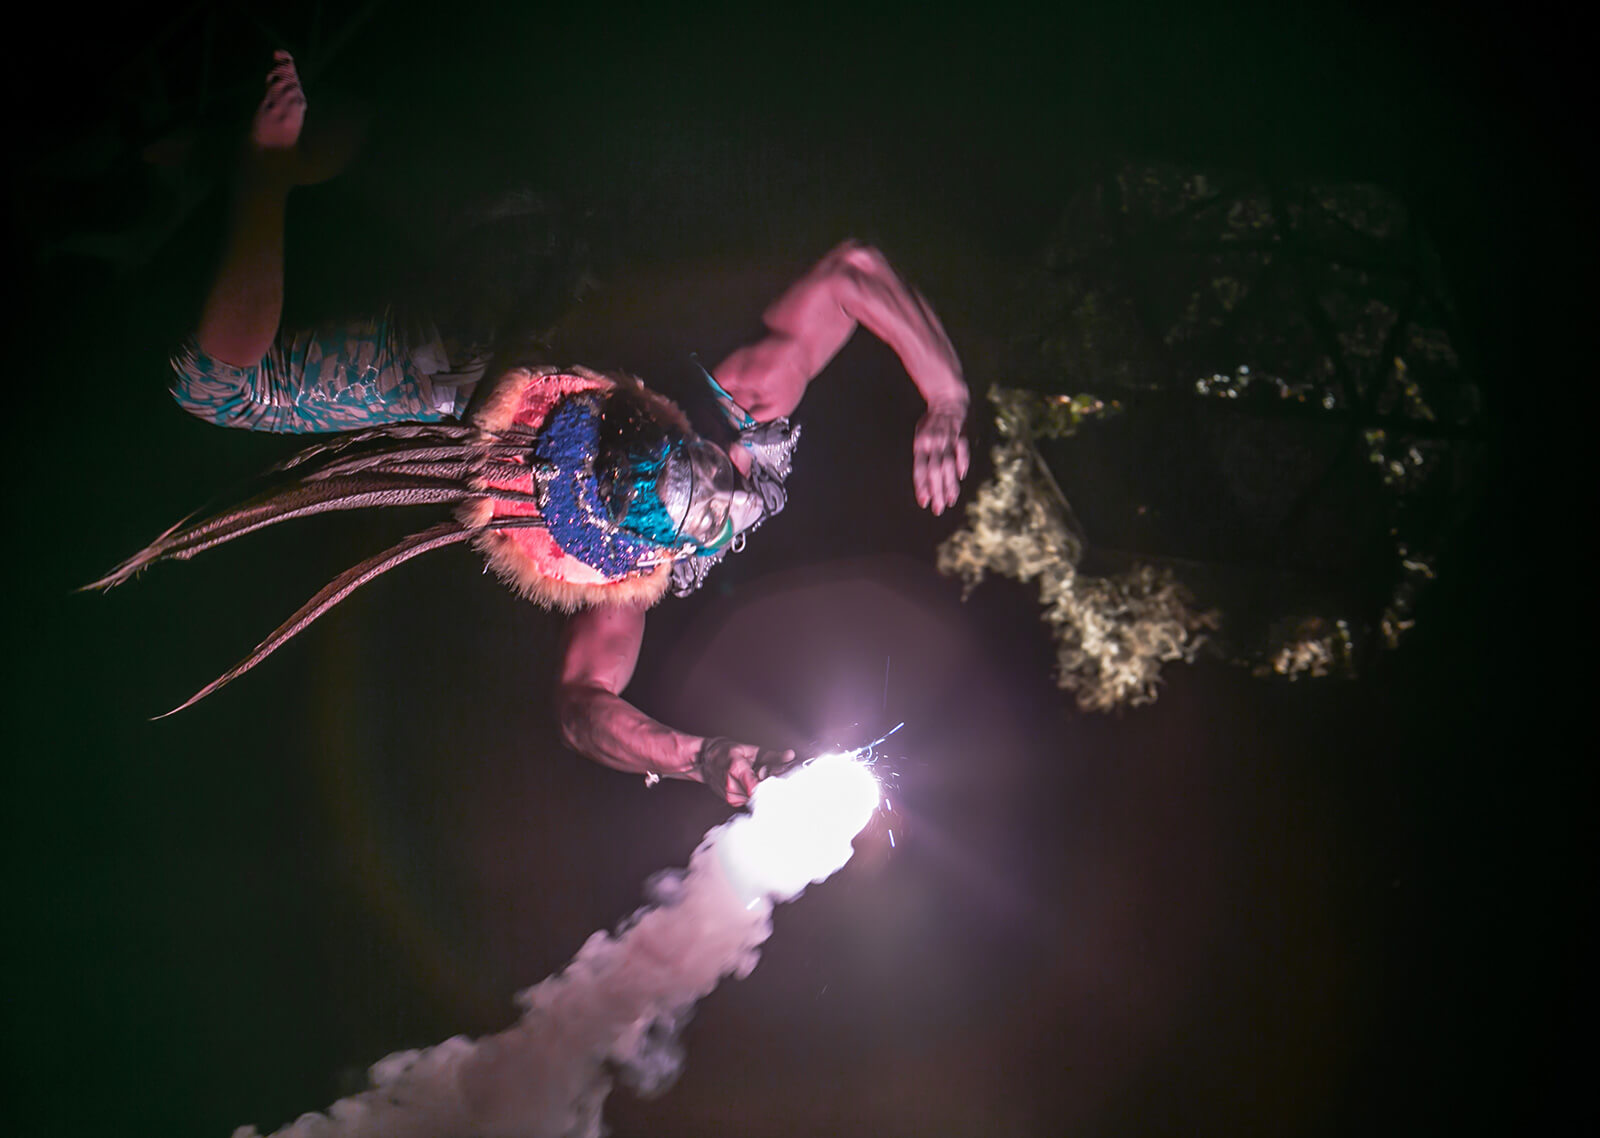 Auralia, an aerialist holding a lit flare 40 feet above the ground, appears to be dancing with the burning Urn filled with 1000’s of prayers for the dead during the finale of Tucson’s annual All Souls Procession. Kathleen has been a Media Circle photographer since 2010.